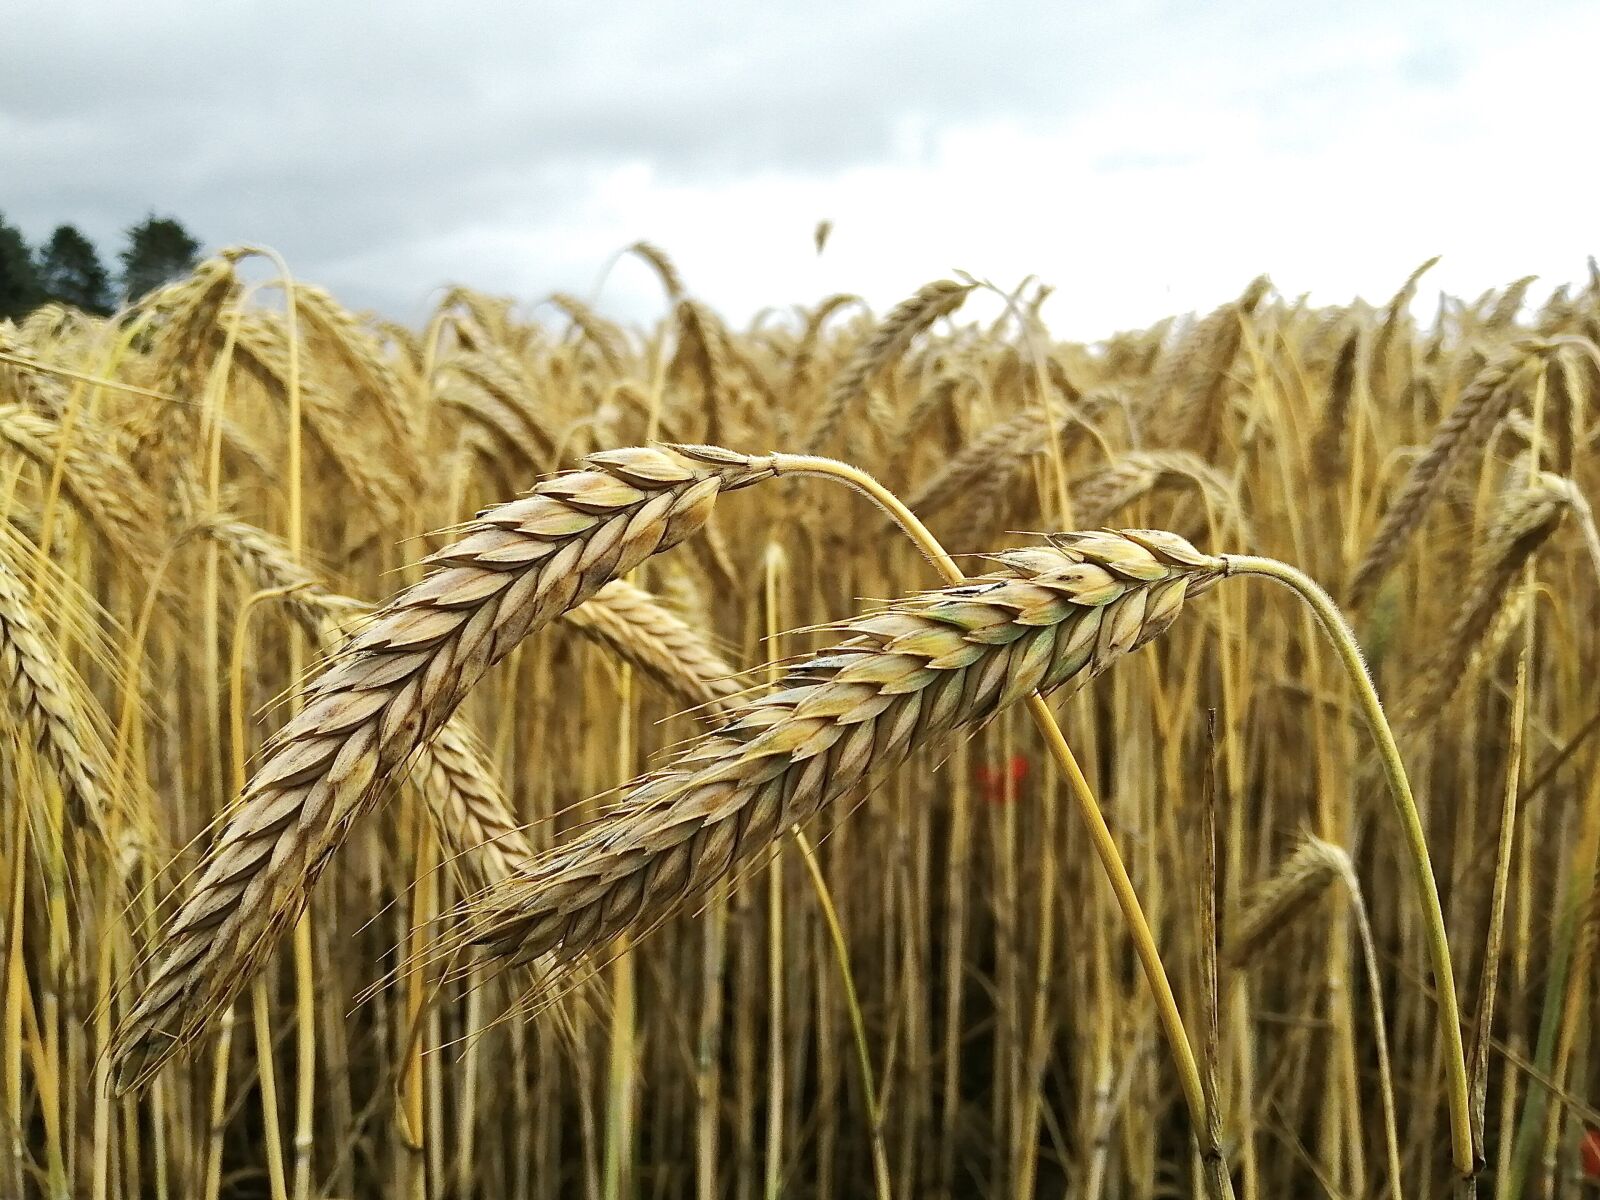 HUAWEI Honor 10 Lite sample photo. Wheat, cereals, wind photography